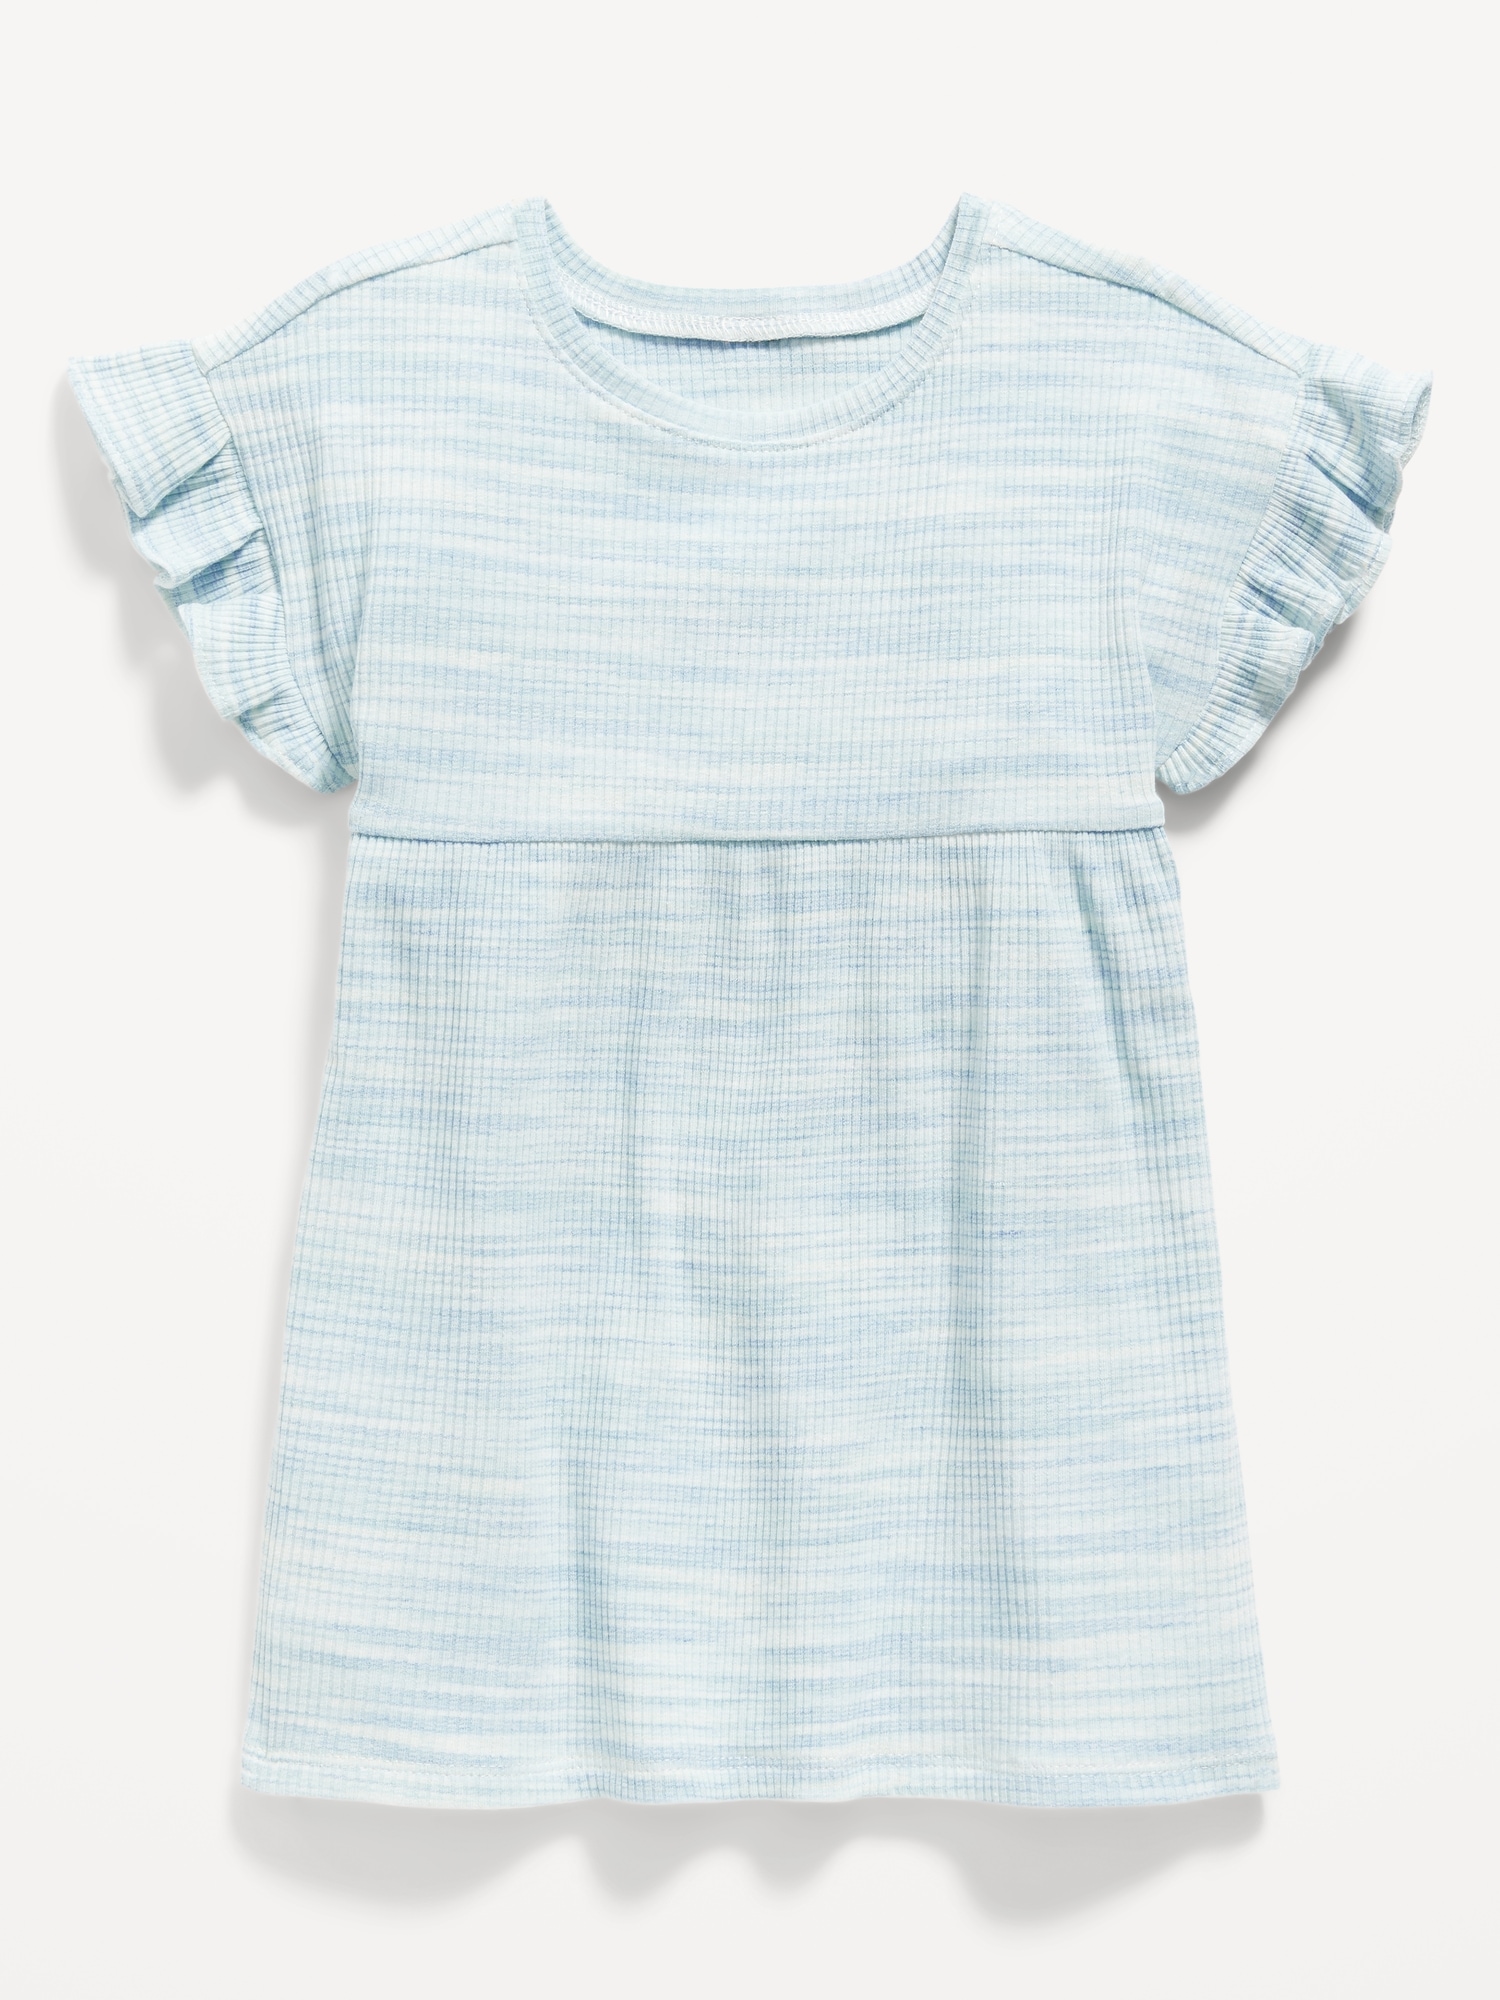 Fit Flare Dress for Toddler Girls